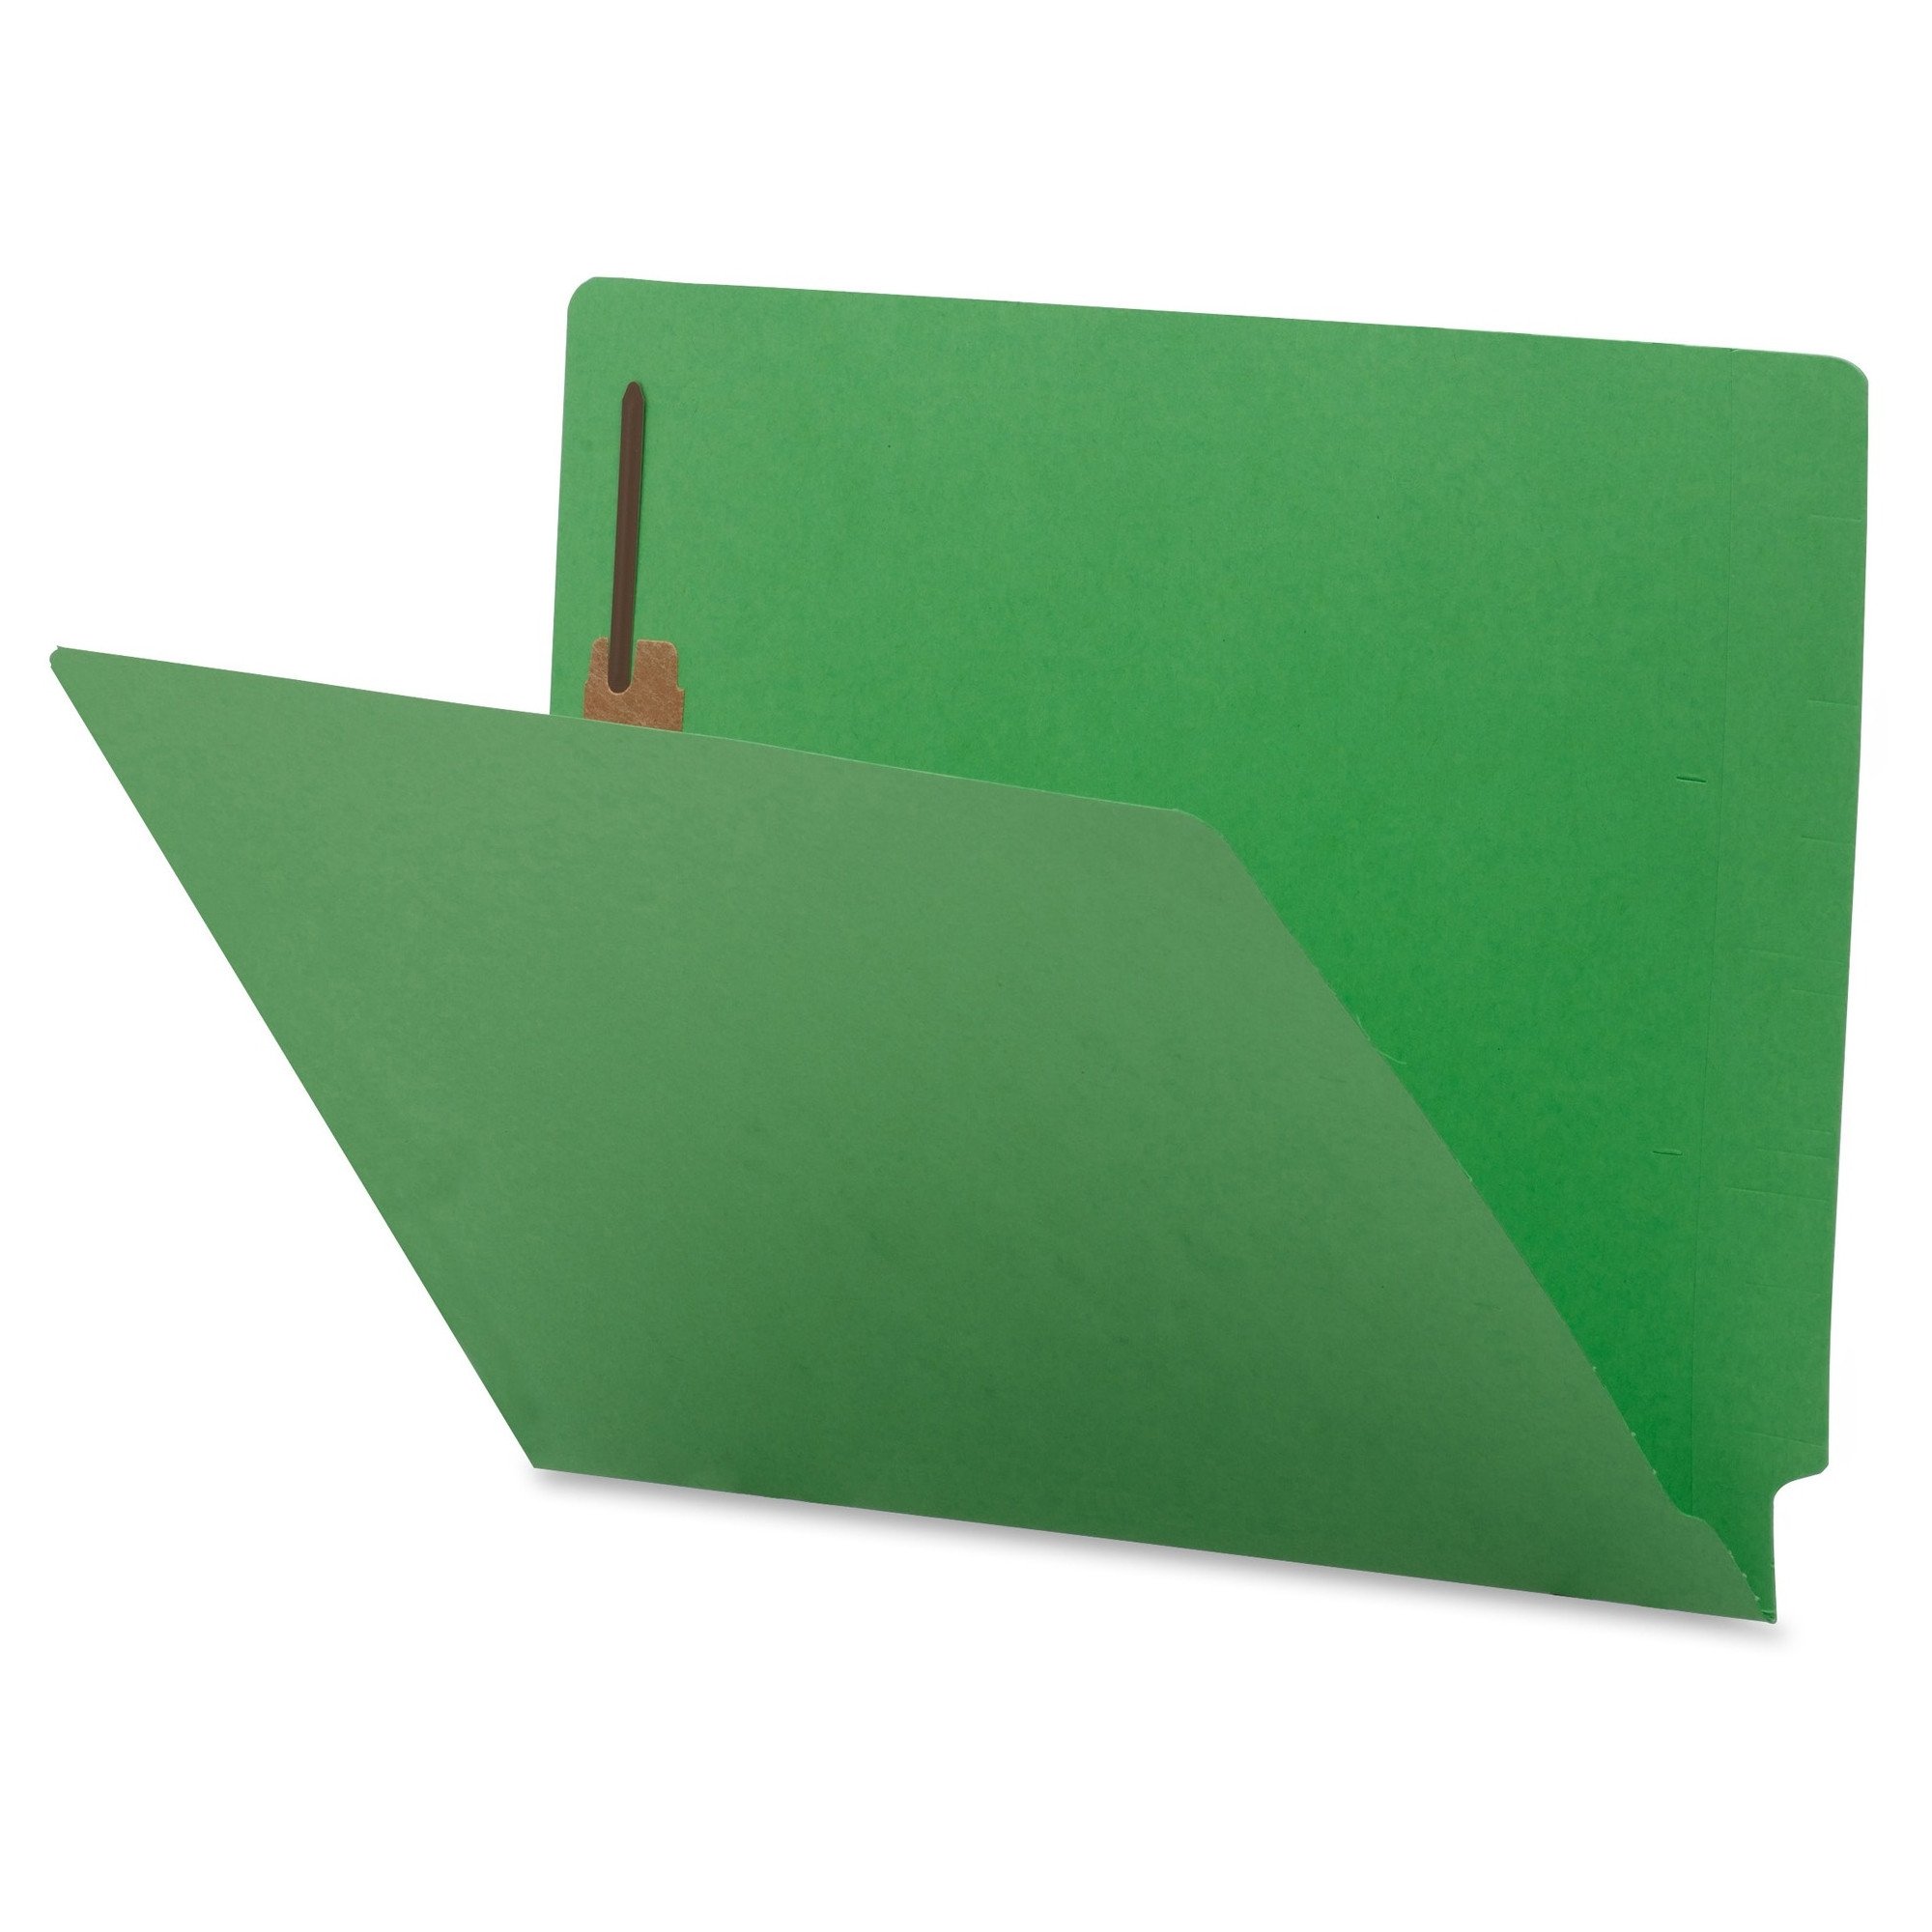 Sparco Green Colored End Tab Fastener Folder